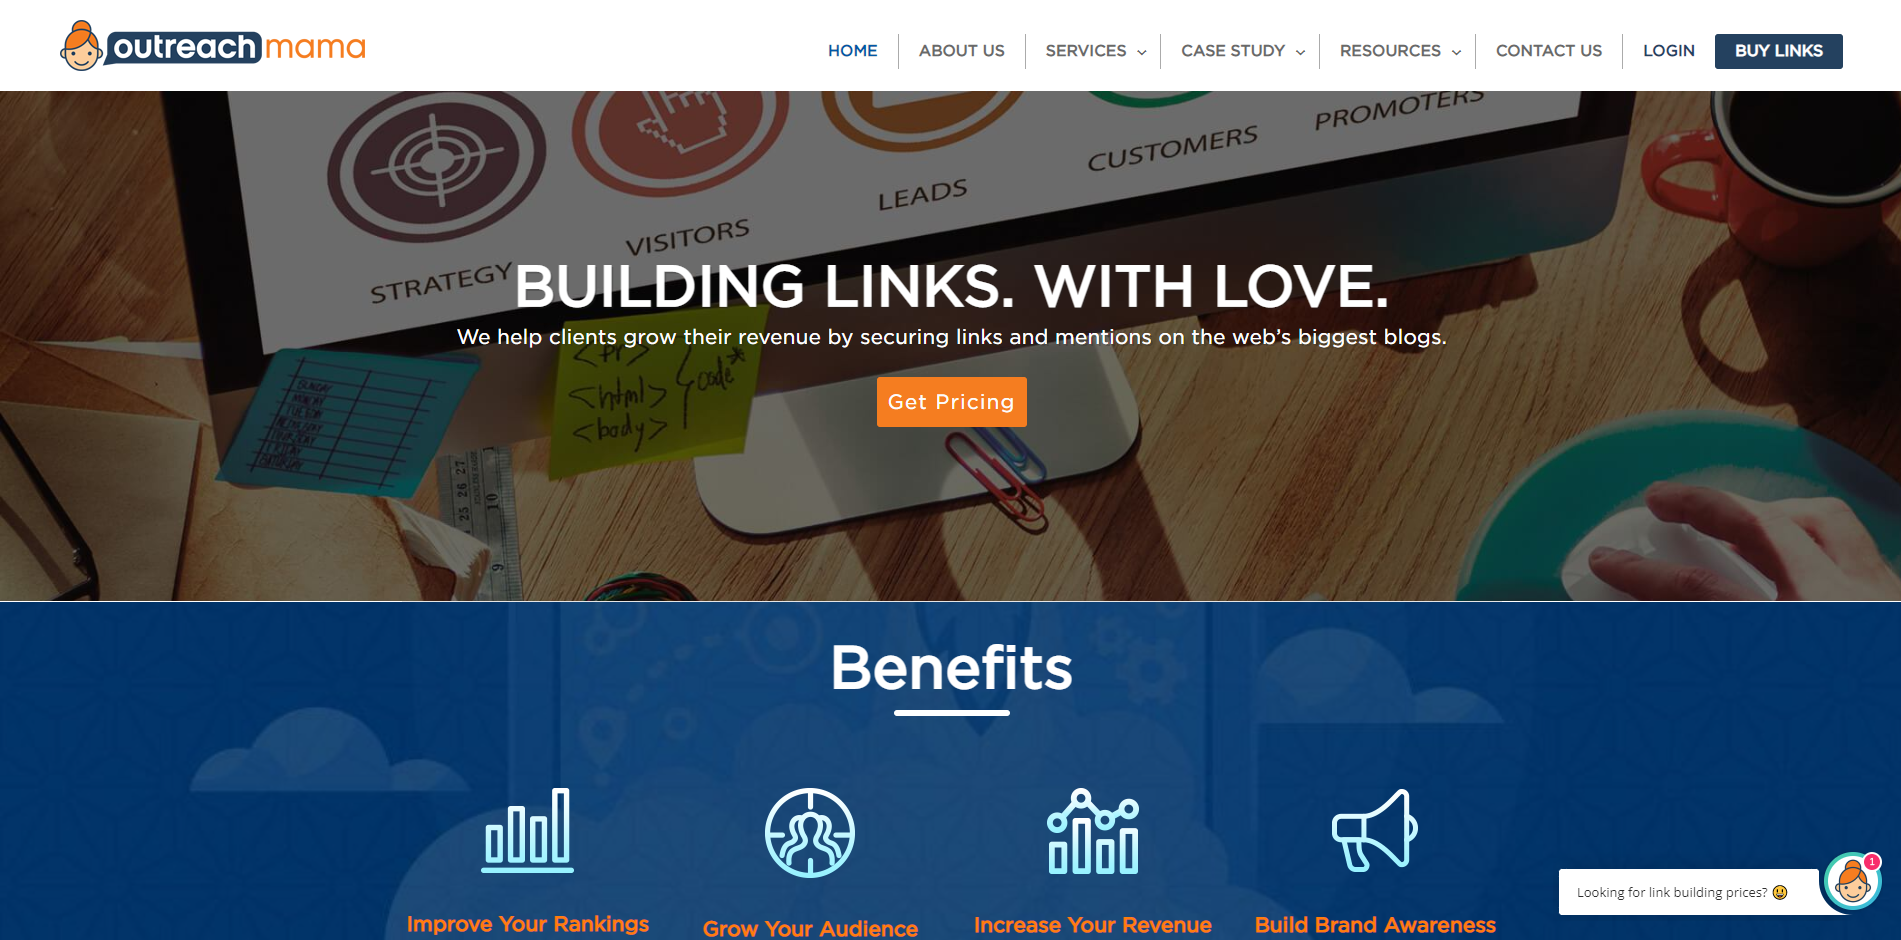 outreach mama link building and guest posting services